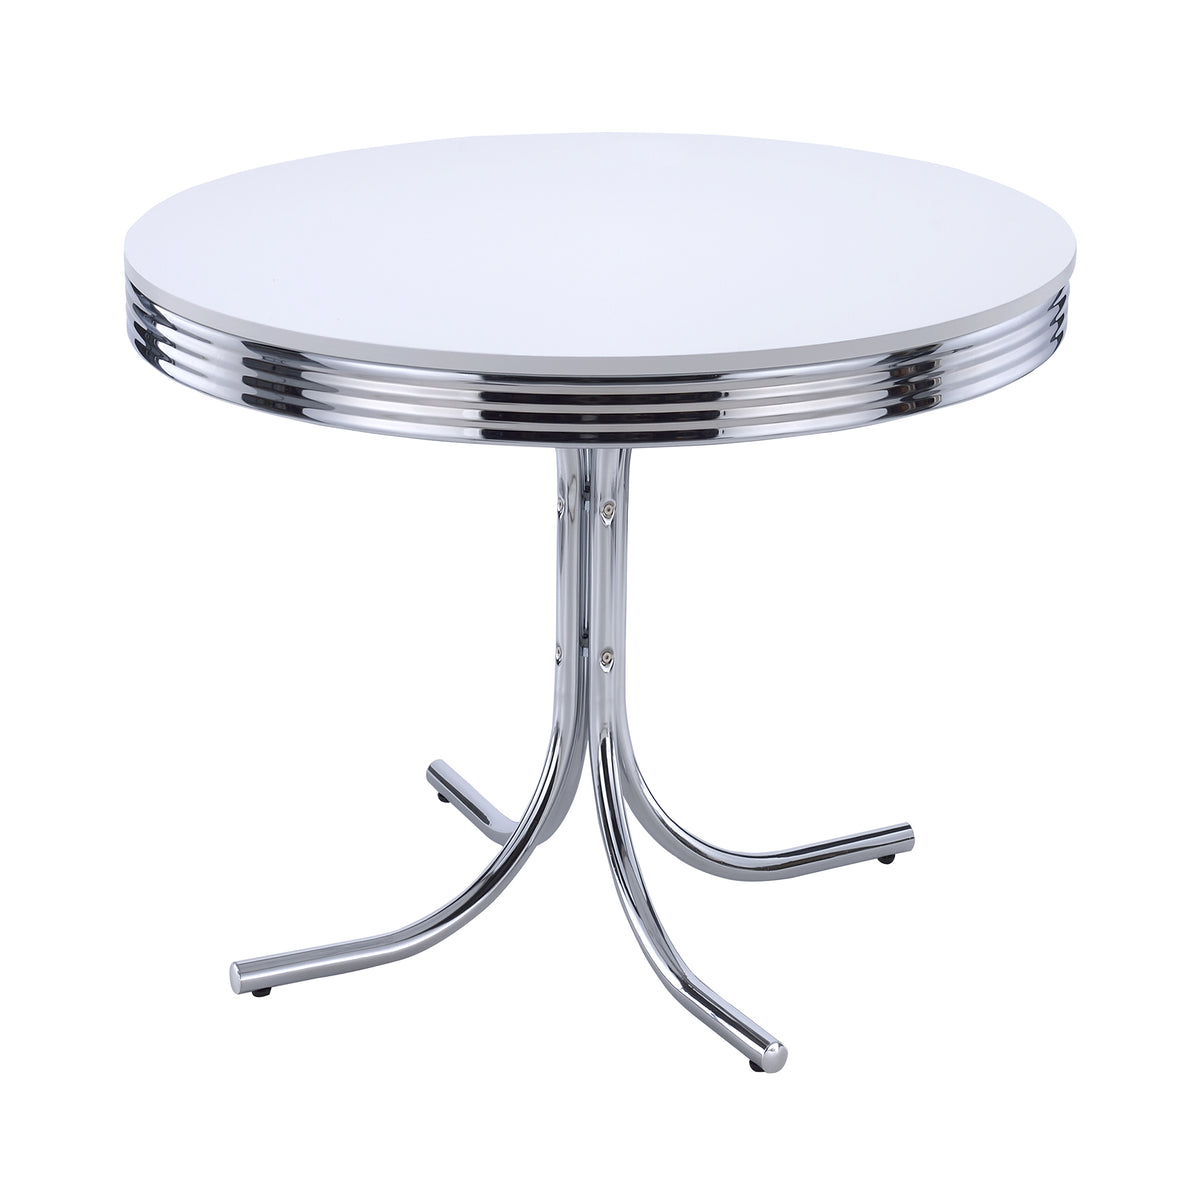 Retro Round Dining Table Glossy White and Chrome Retro Round Dining Table Glossy White and Chrome Half Price Furniture